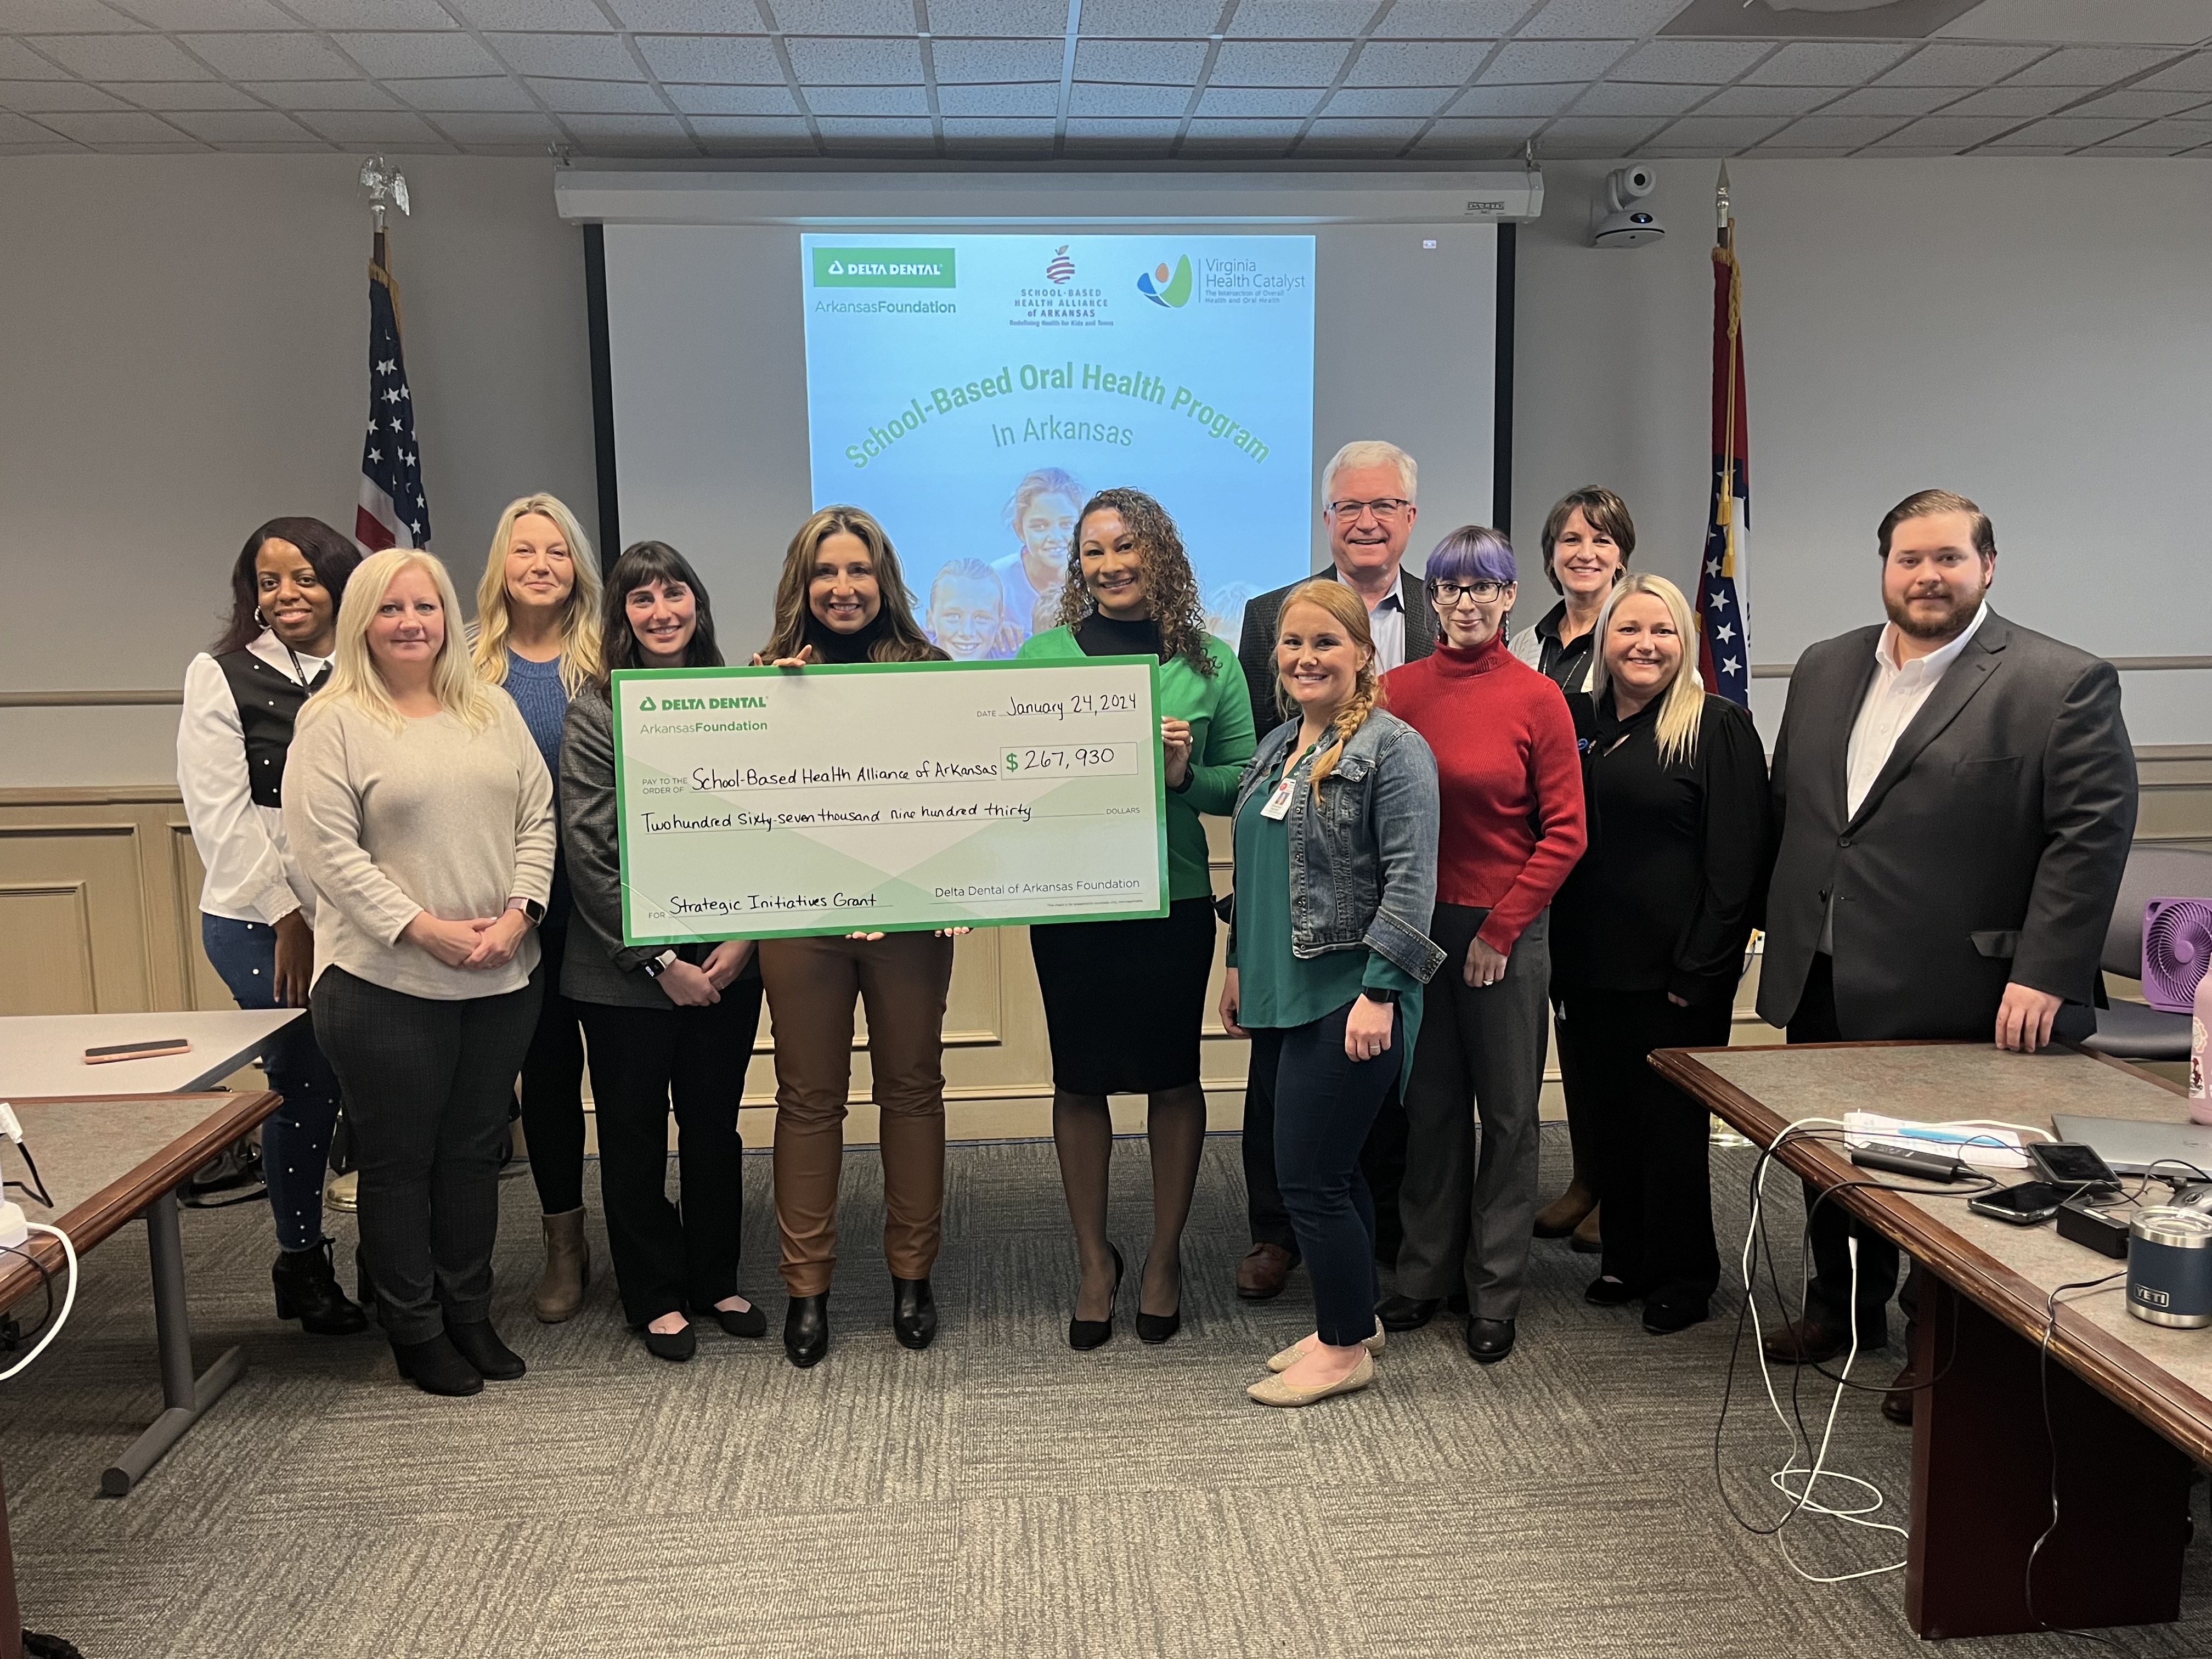 Sharon Lanier, Ph.D., executive director of the Delta Dental of Arkansas Foundation, center, presents a $267,930 check to Tamara Baker, RN, MPH, executive director of the School-Based Health Alliance of Arkansas, to her left, on January 24, 2024.